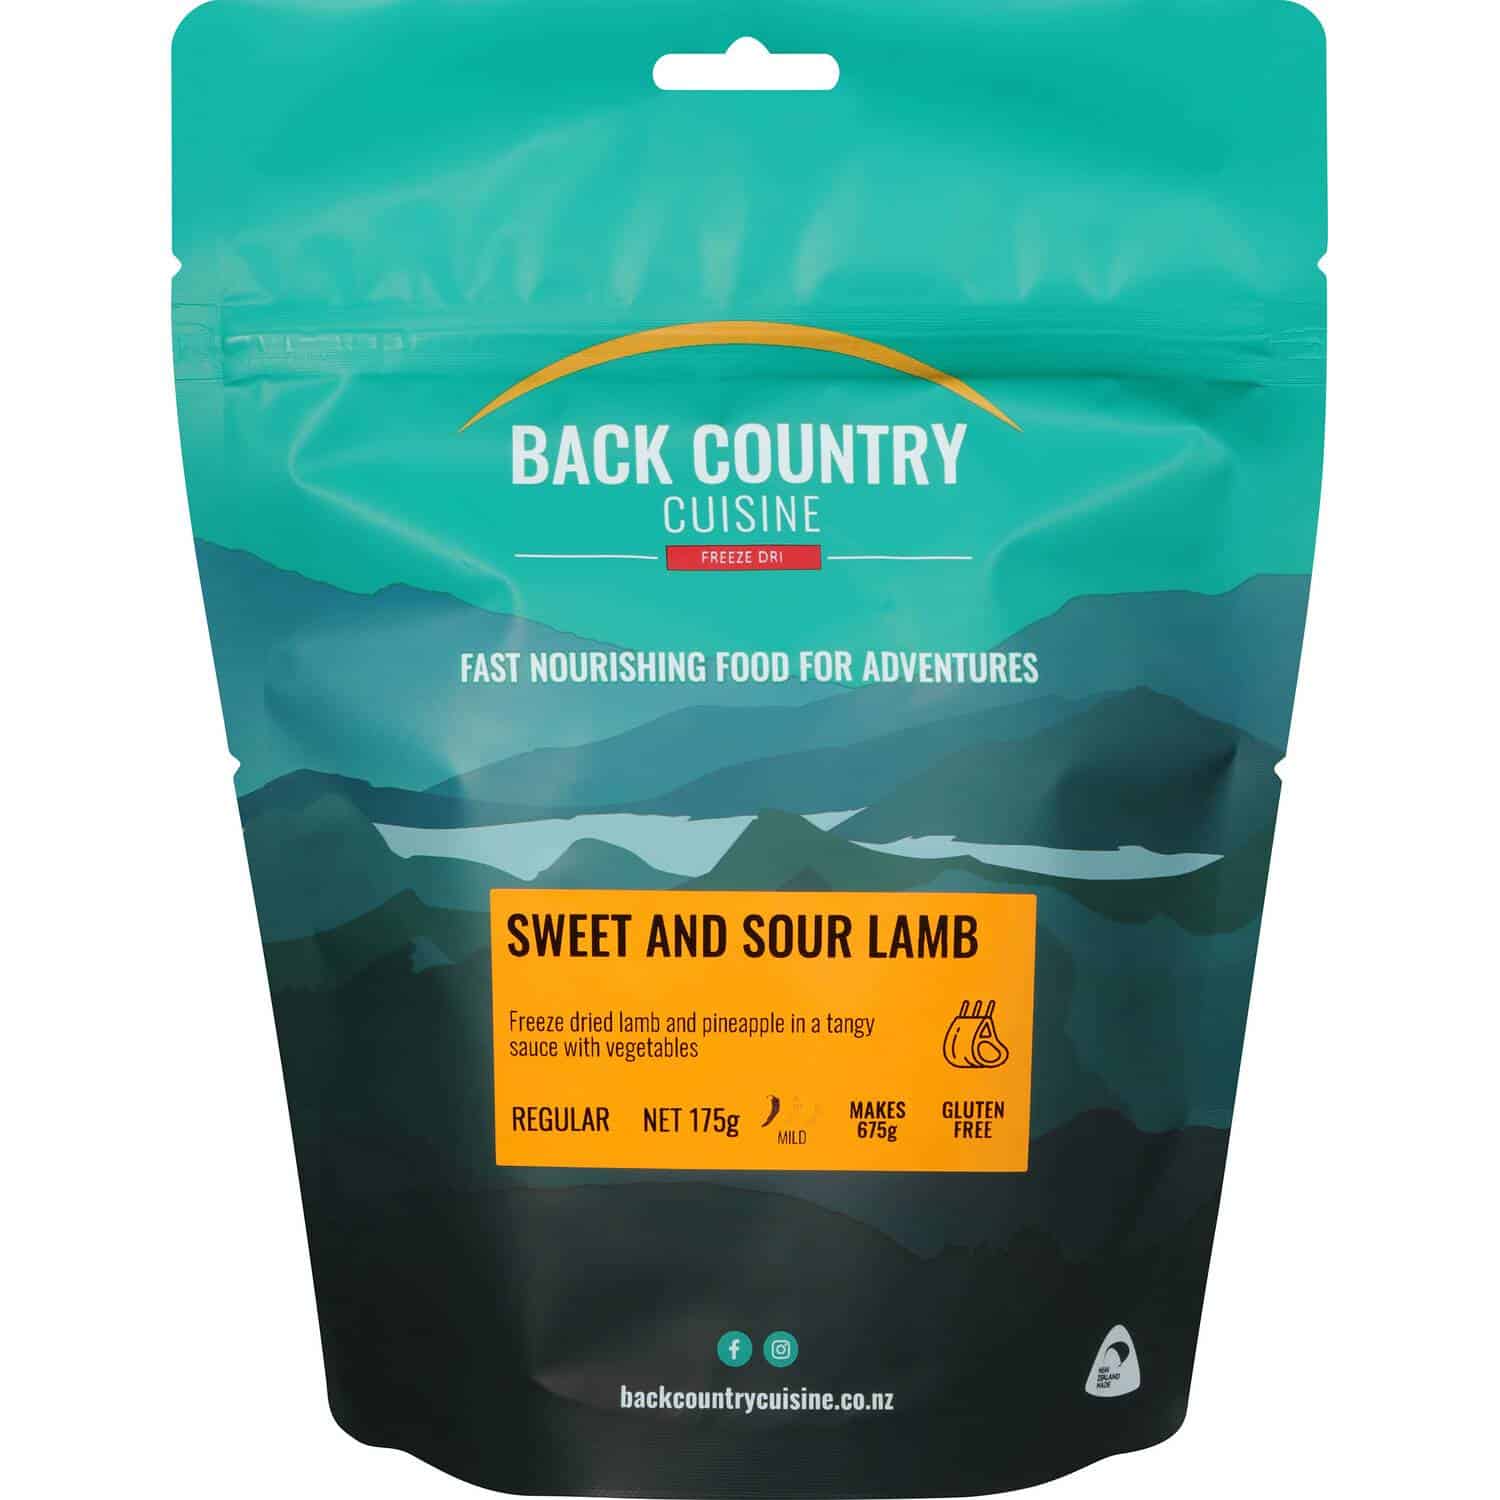 Back Country Cuisine Sweet & Sour Lamb Regular - Tramping Food and Accessories sold by Venture Outdoors NZ